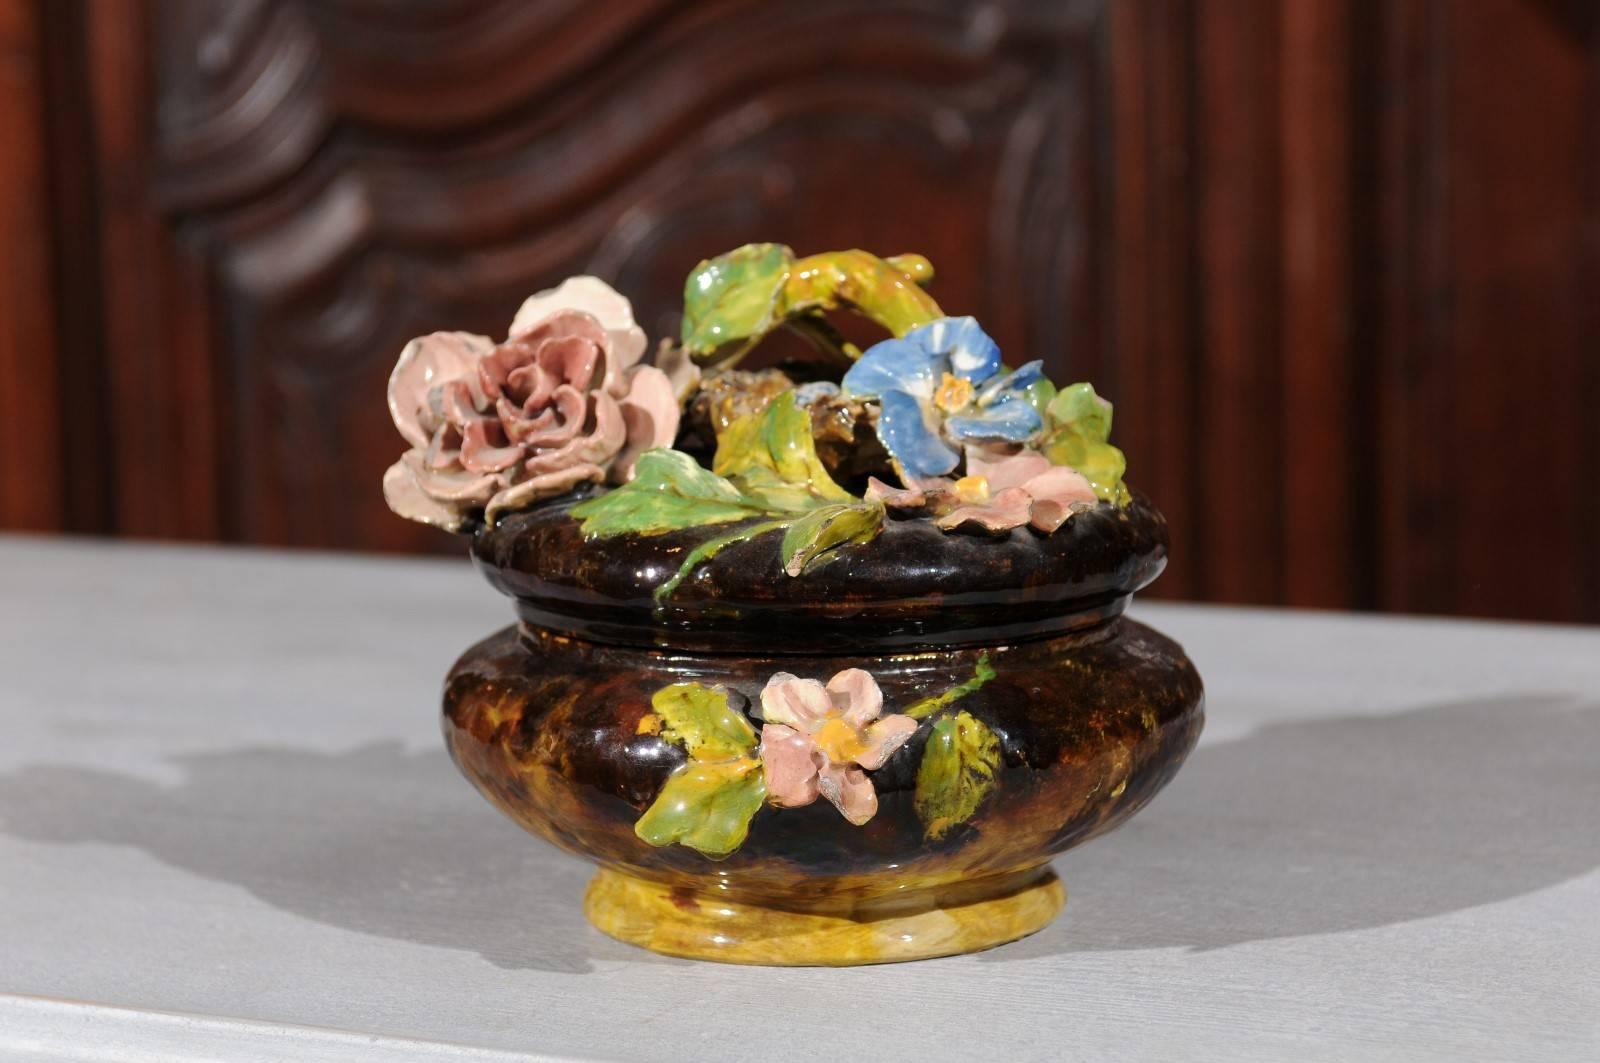 A French 19th century petite faience covered bowl with floral and bird's nest barbotine décor. This exquisite French pottery features a round dark brown body, adorned with an exuberant floral décor, typical of the barbotine productions. The